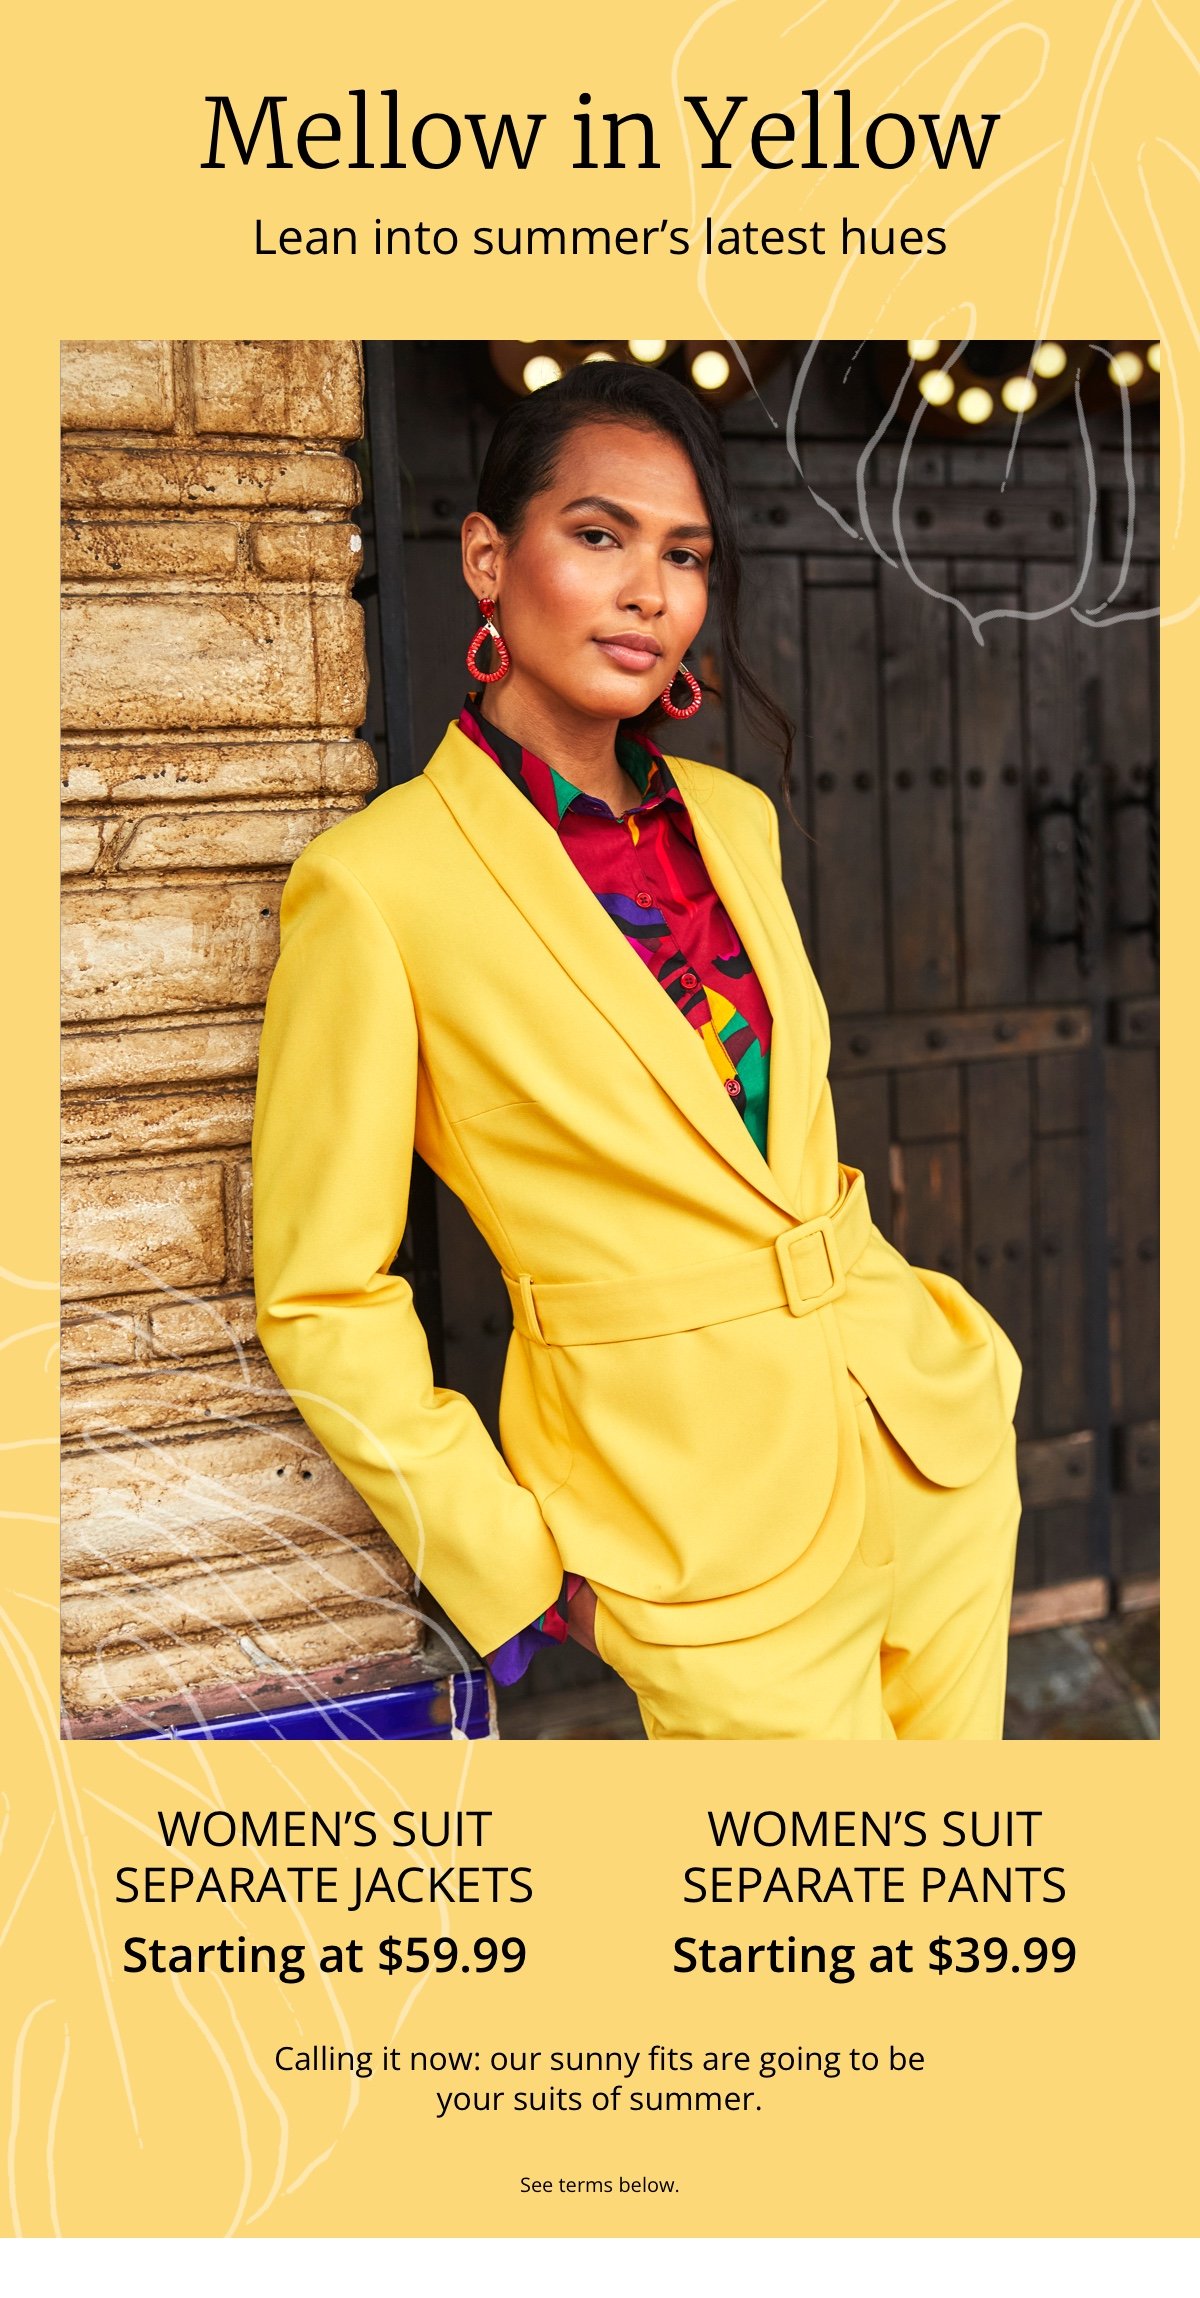 Mellow in Yellow|Lean into summer's latest hues|Women's Suit Separate Jackets|Starting at \\$59.99|Women's Suit Separate Pants|Starting at \\$39.99|Calling it now: our sunny fits are going to be your suits of summer.|See terms below.